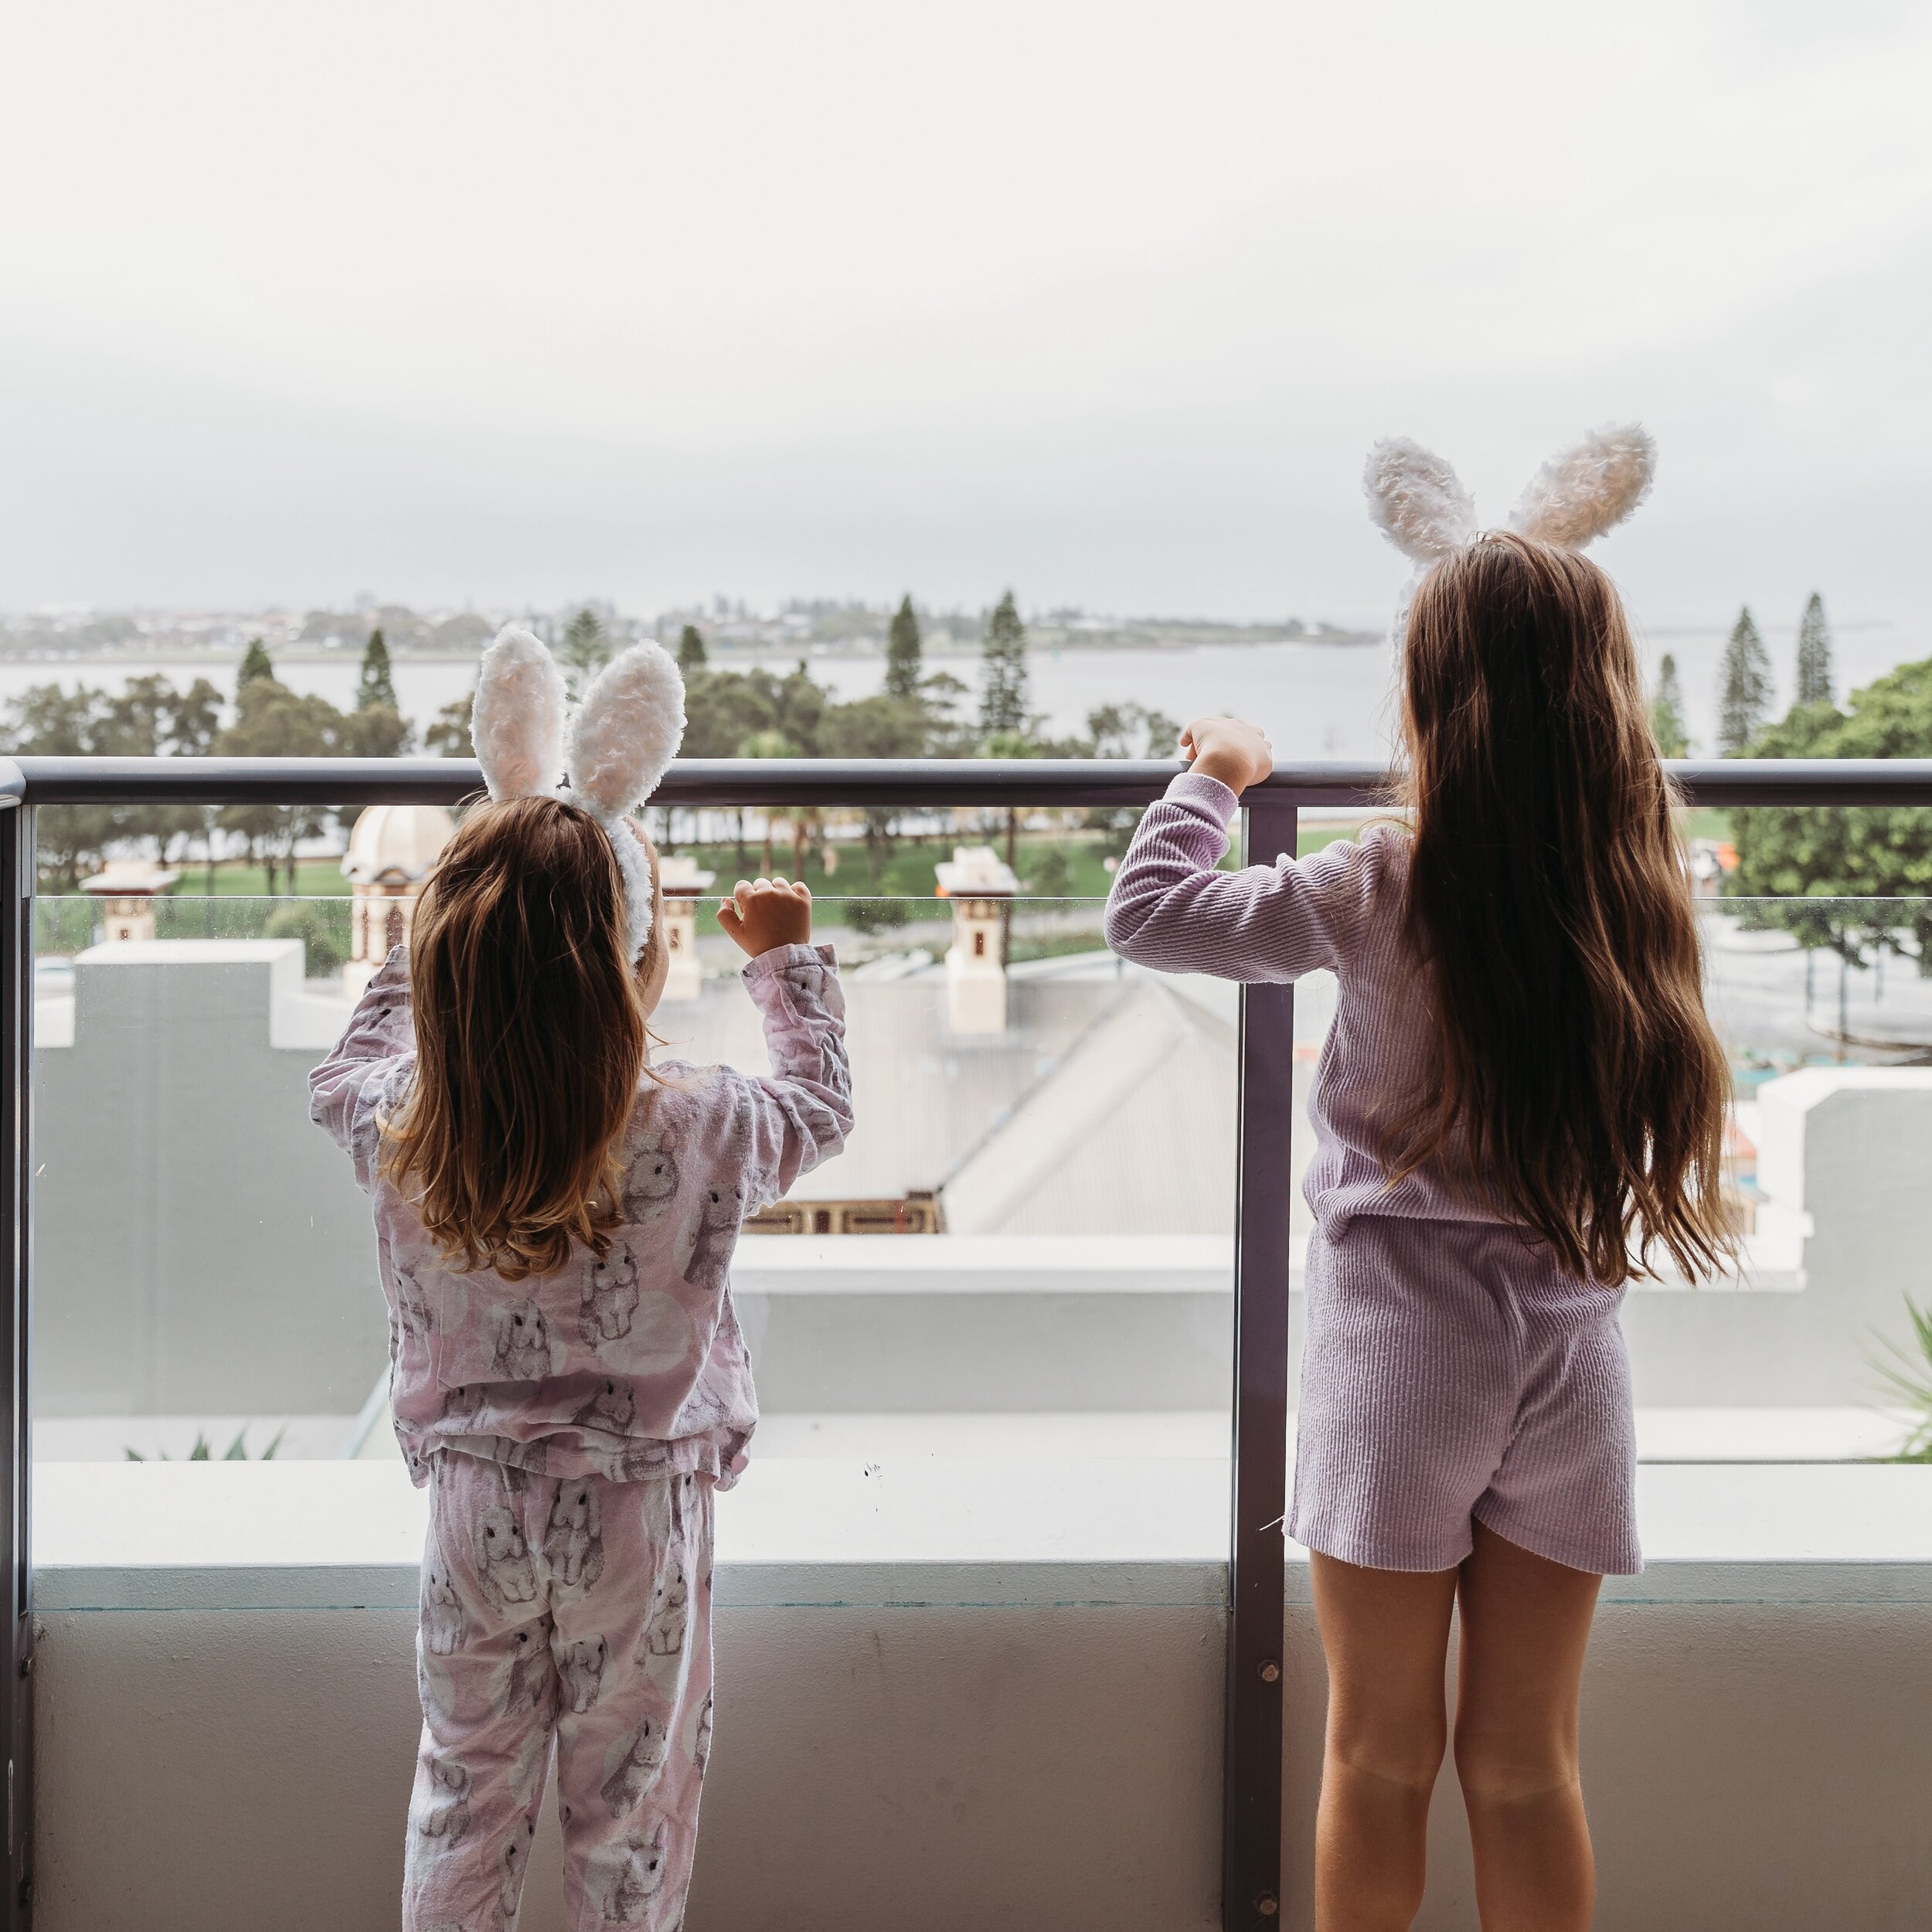 Hello Easter! You arrived rather quickly this year 😯

If you haven&rsquo;t made plans yet, we still have some rooms available across the long weekend that are perfect for a family stay. 

Explore the city, dine at one of the many incredible restaura